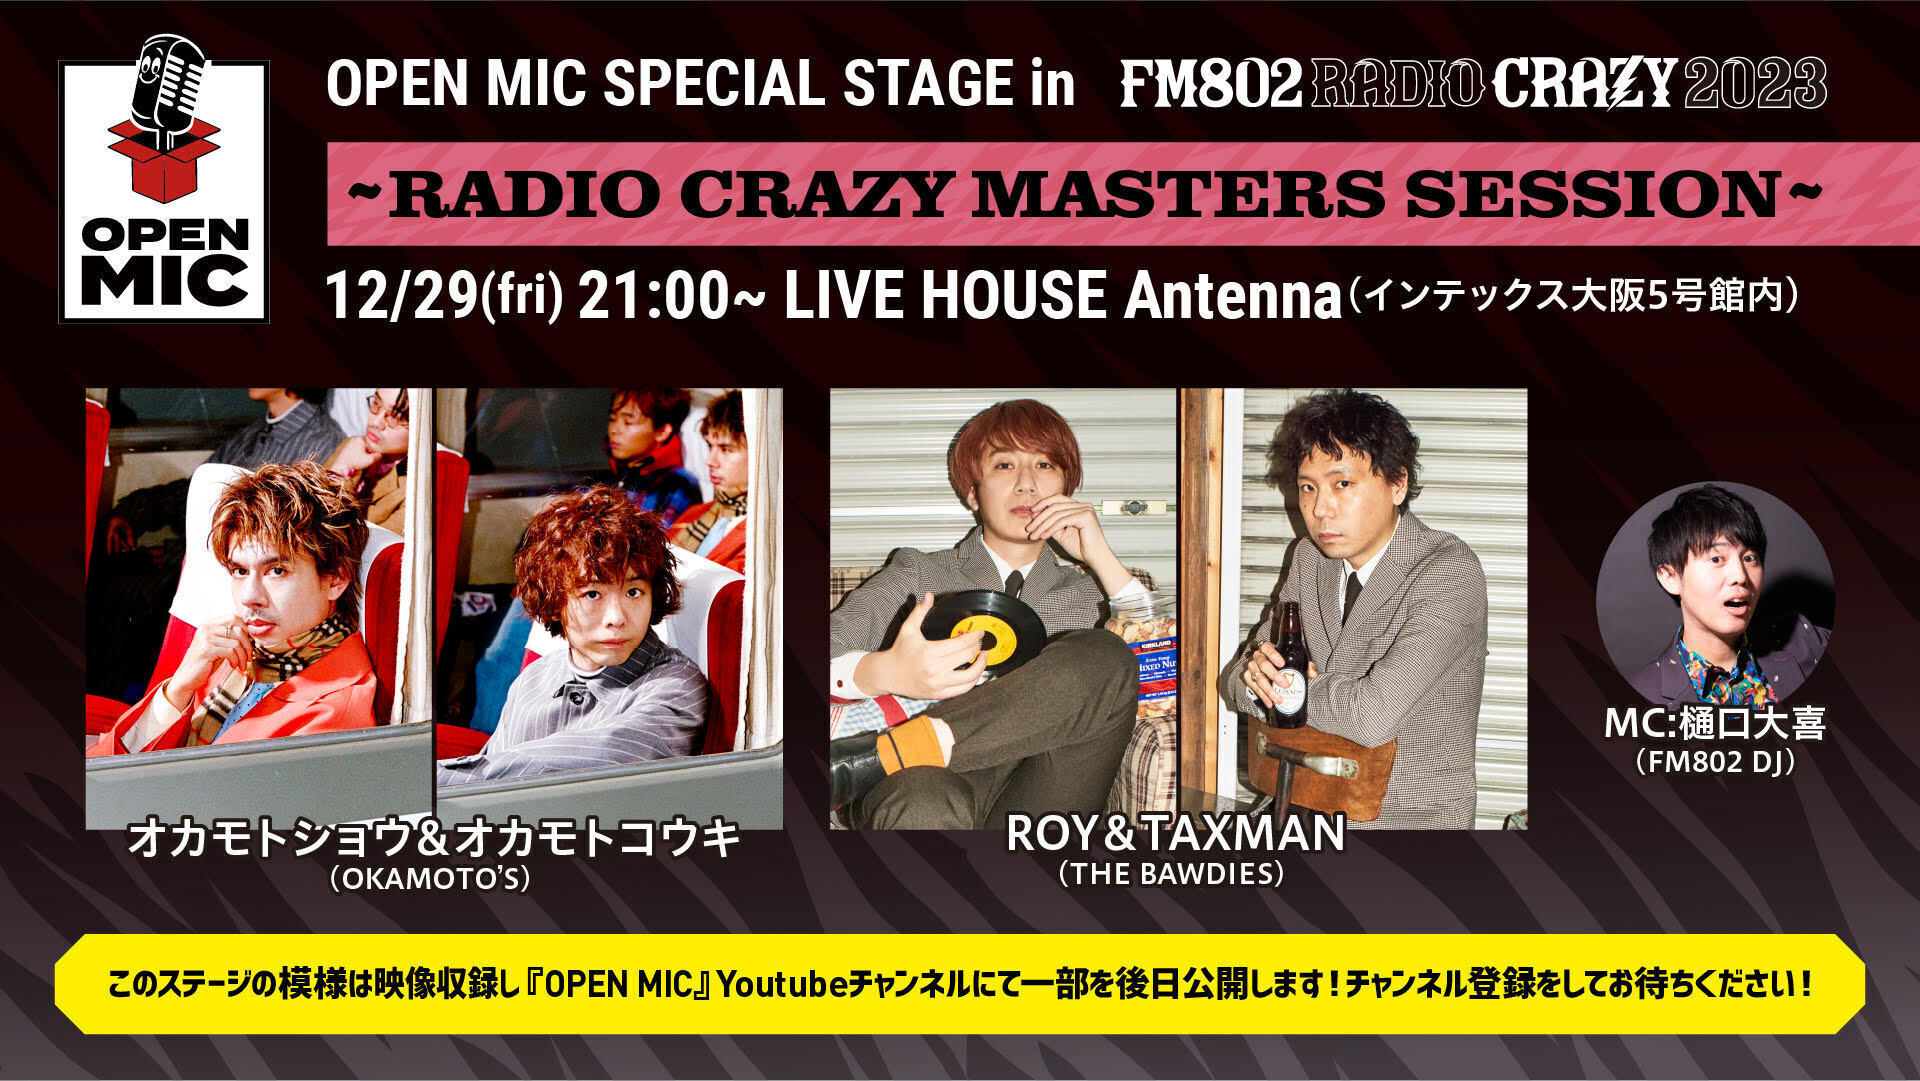 12/29「FM802 ROCK FESTIVAL RADIO CRAZY 2023」OPEN MIC SPECIAL STAGEにROY & TAXMANの出演が決定！